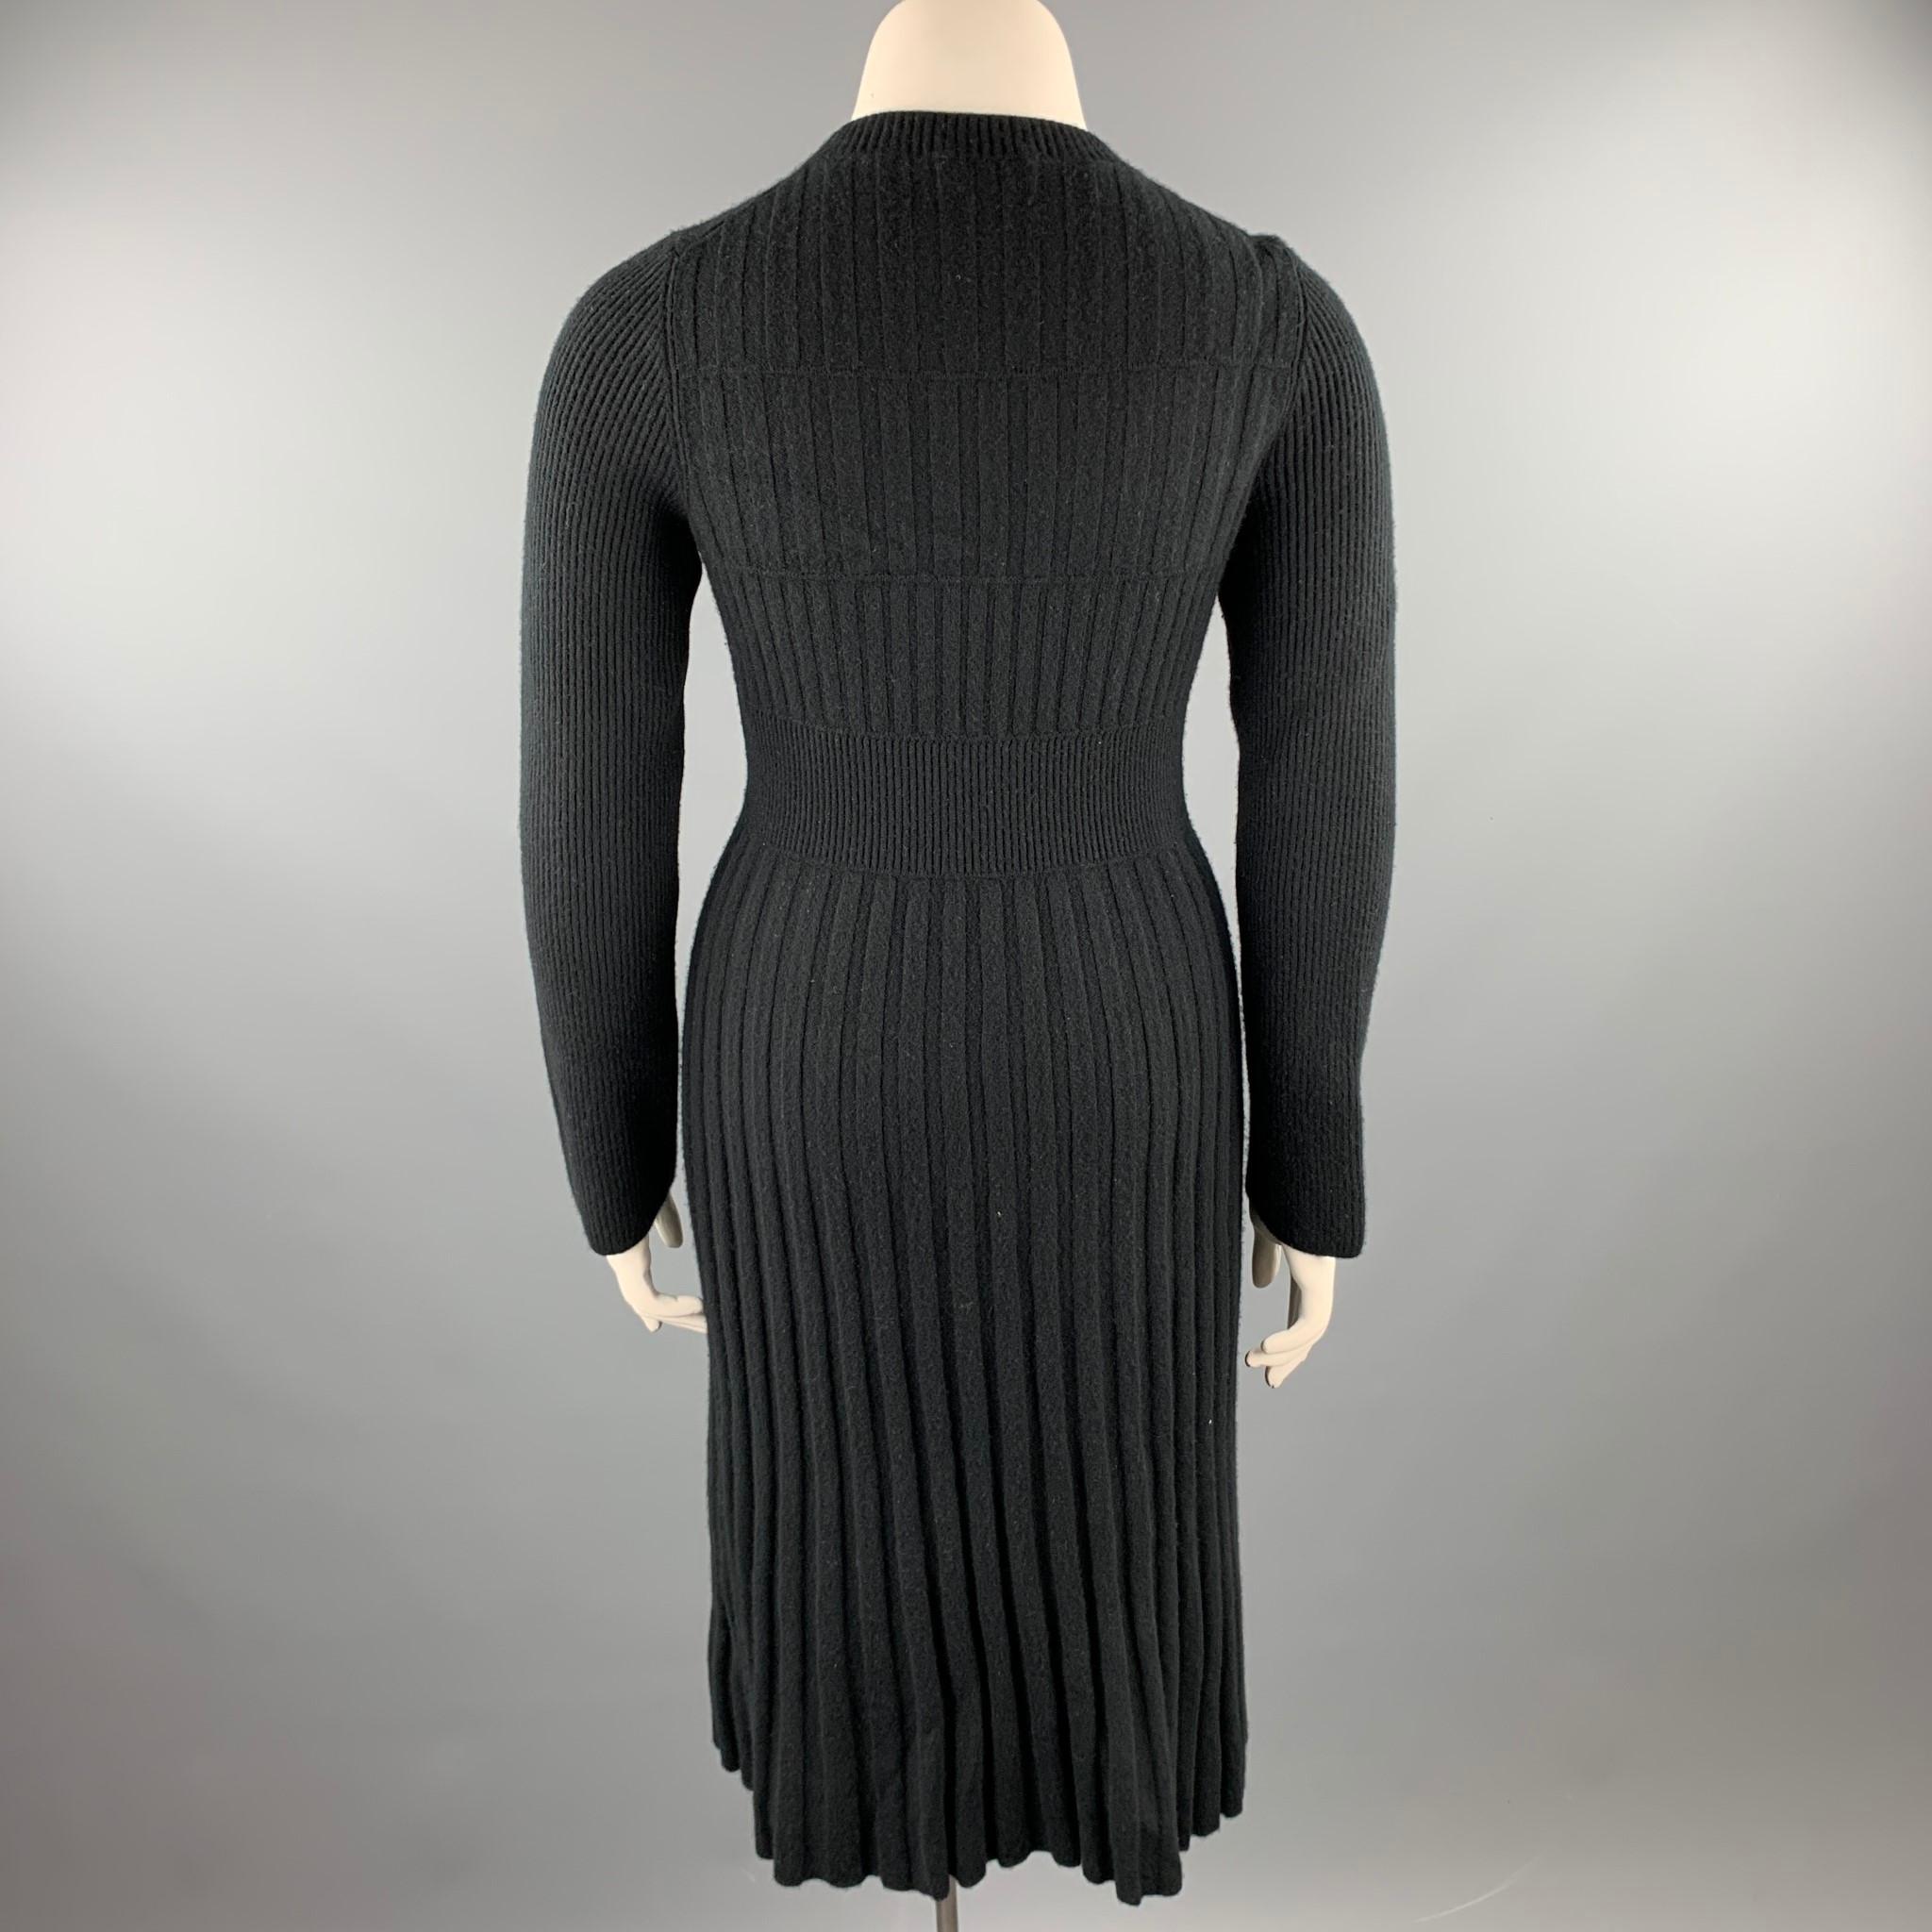 Women's CHANEL Size 10 Black Knitted Pleated Wool Crew-Neck Sweater Dress